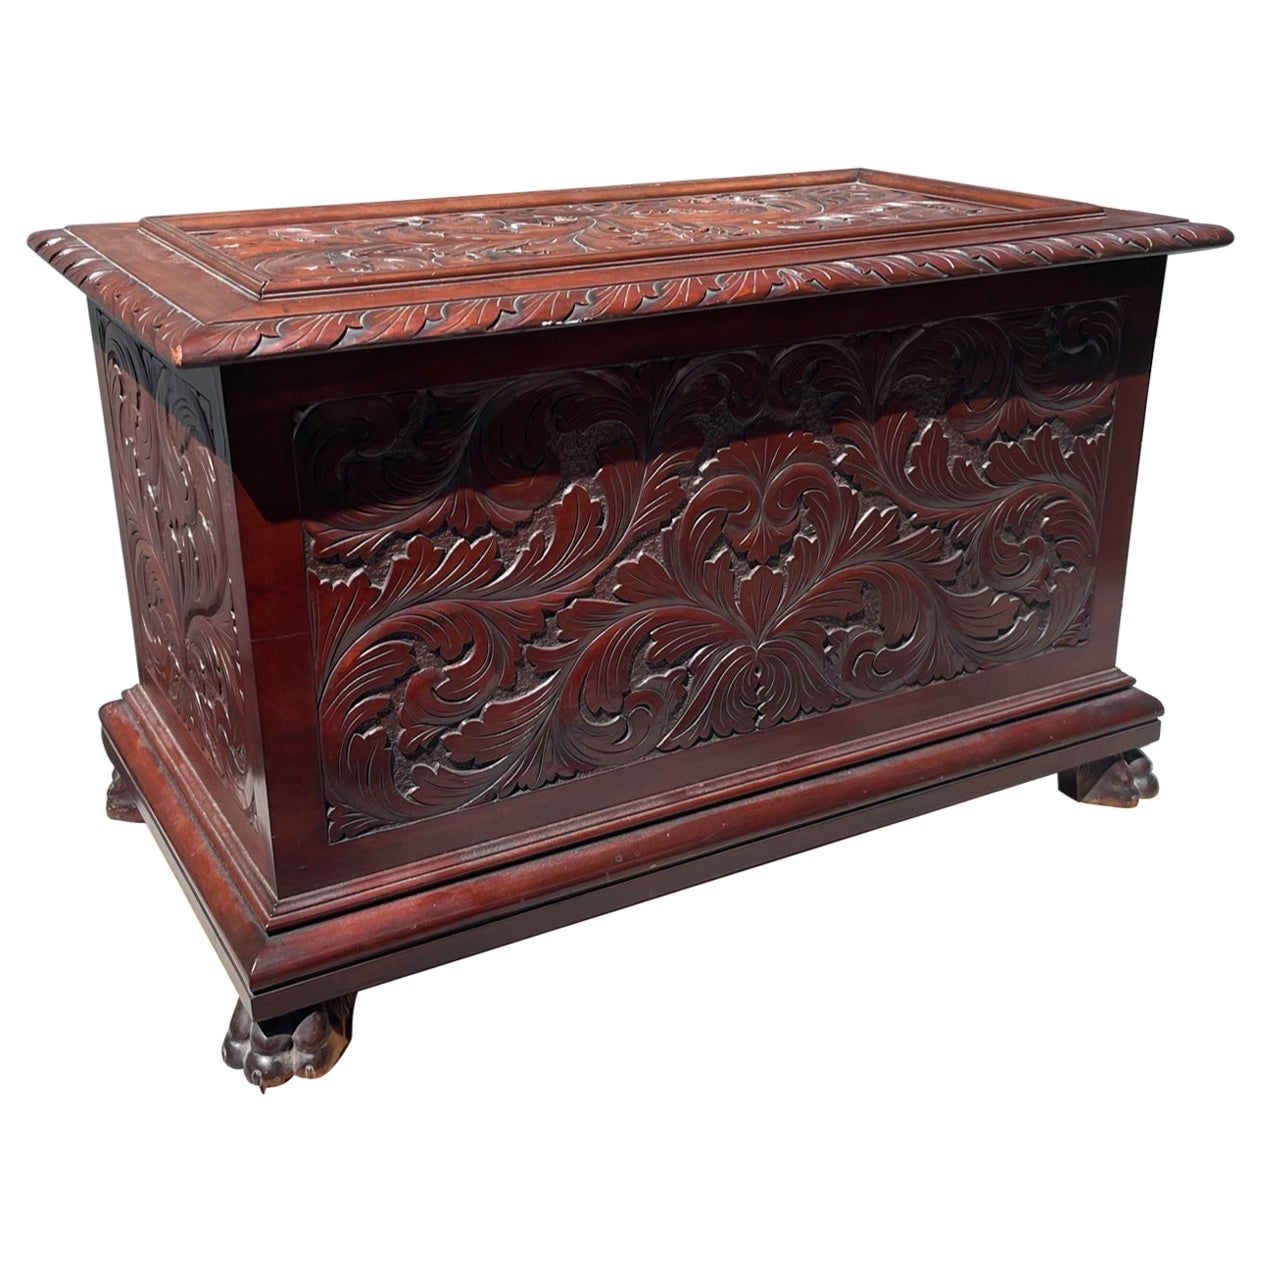 19th Century Baroque Revival Carved Wooden Blanket Chest For Sale